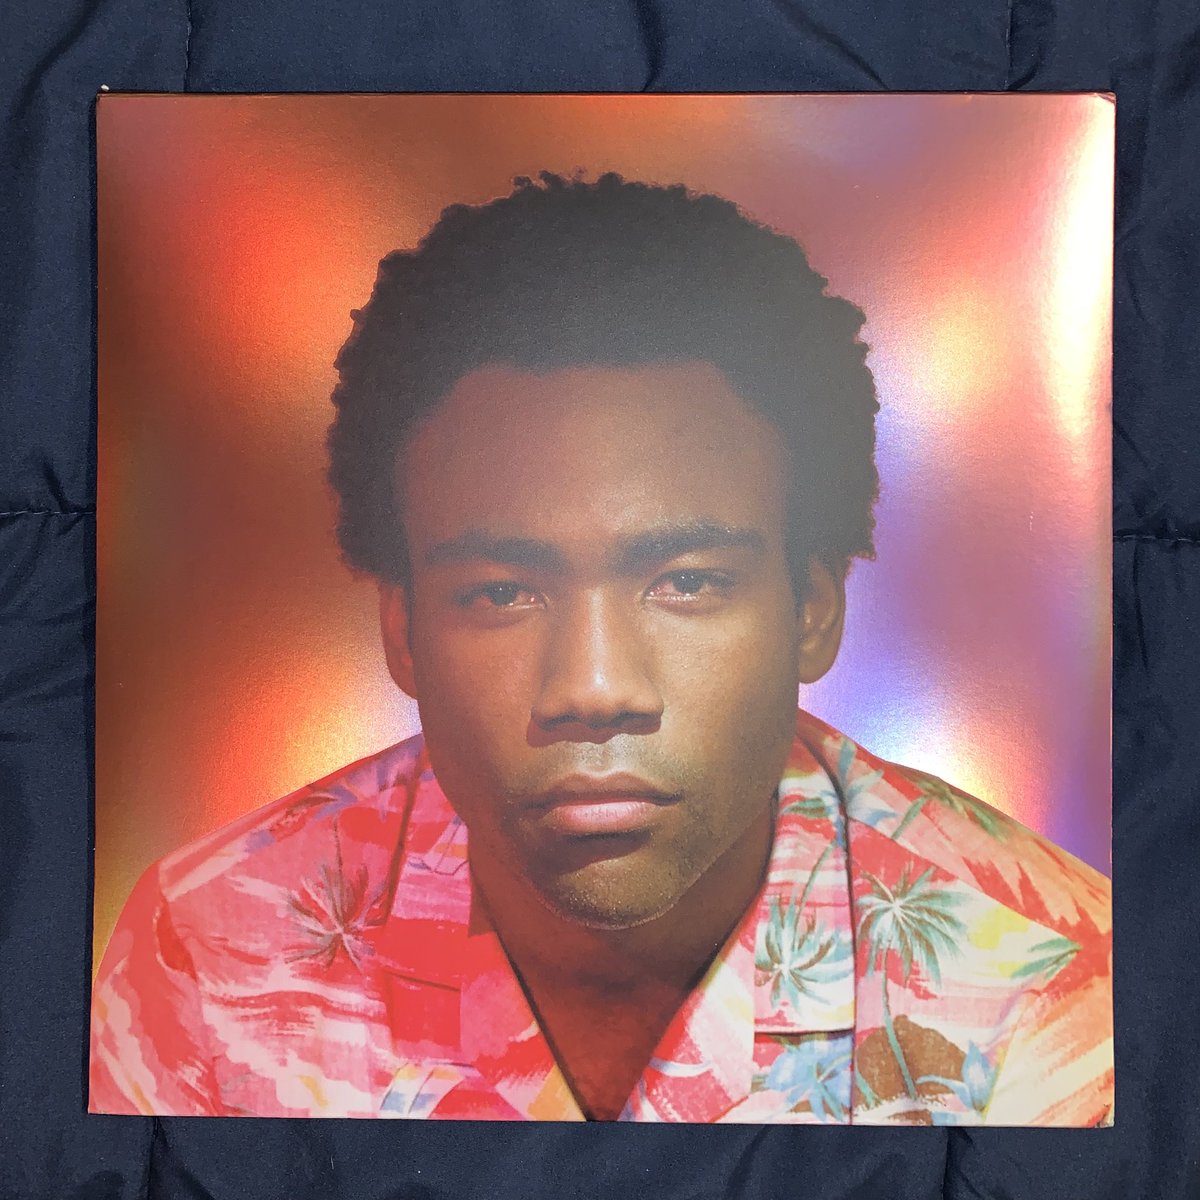 Because the Internet- Childish Gambino, includes 72 page screenplay to read along to the album